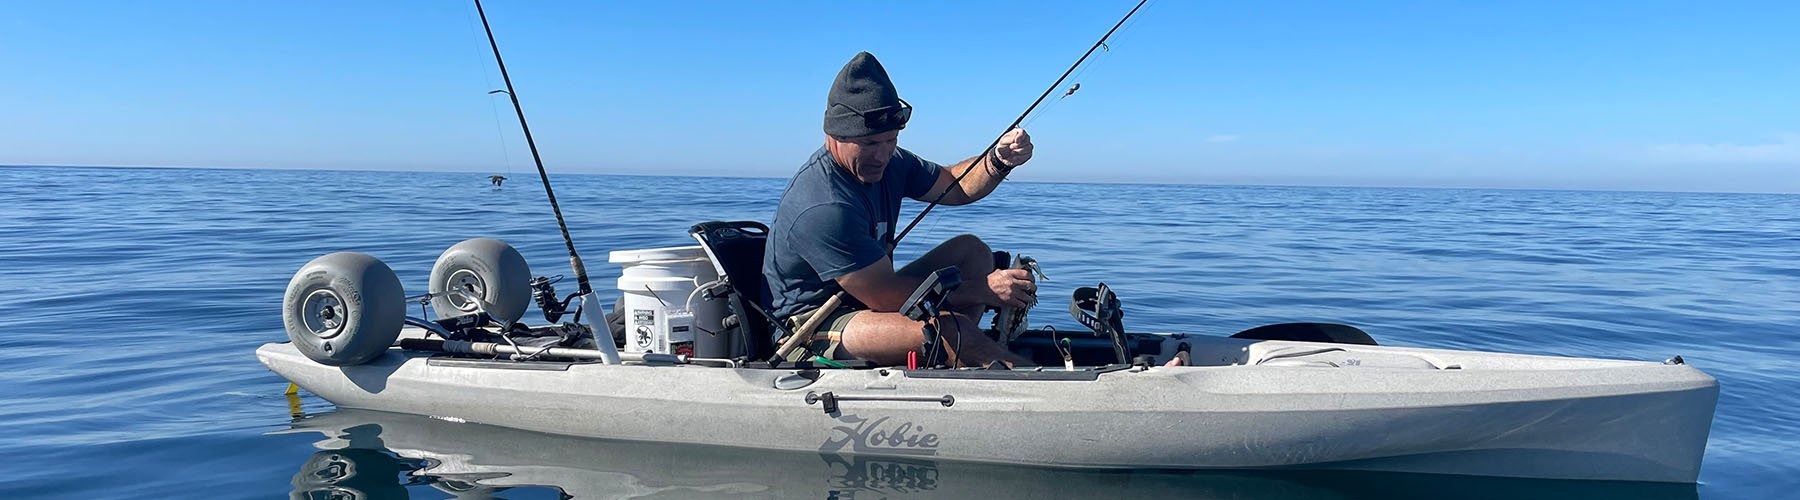 How to Outfit a Kayak for Fishing - RogueEndeavor